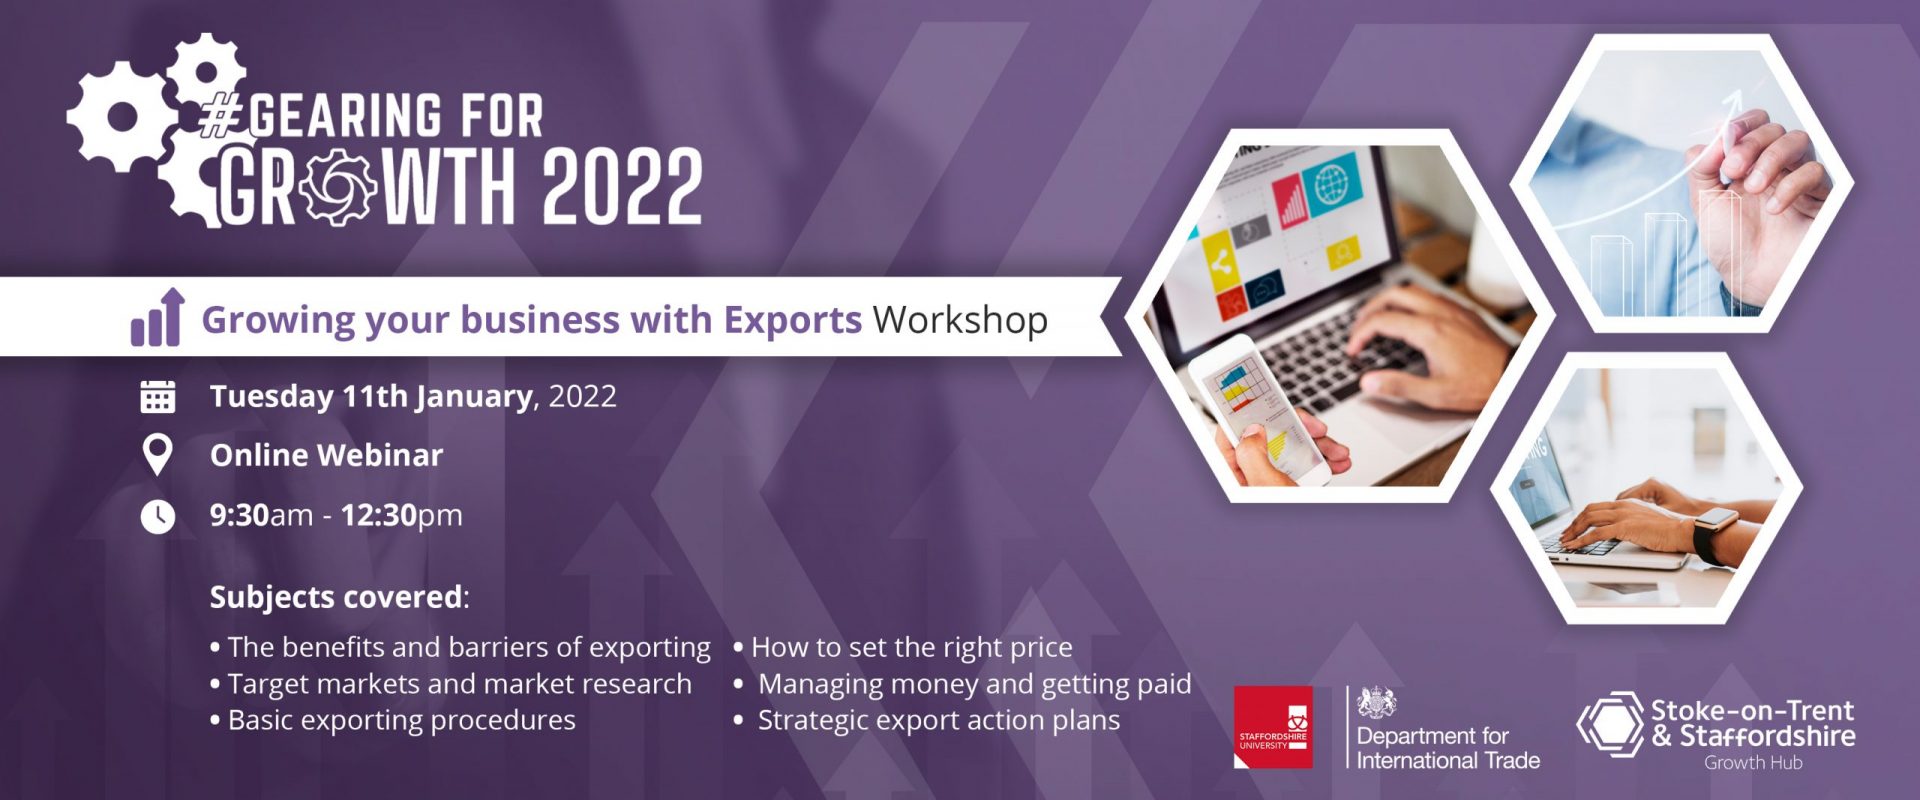 #GEARINGFORGROWTH2022: Growing your business with Exports